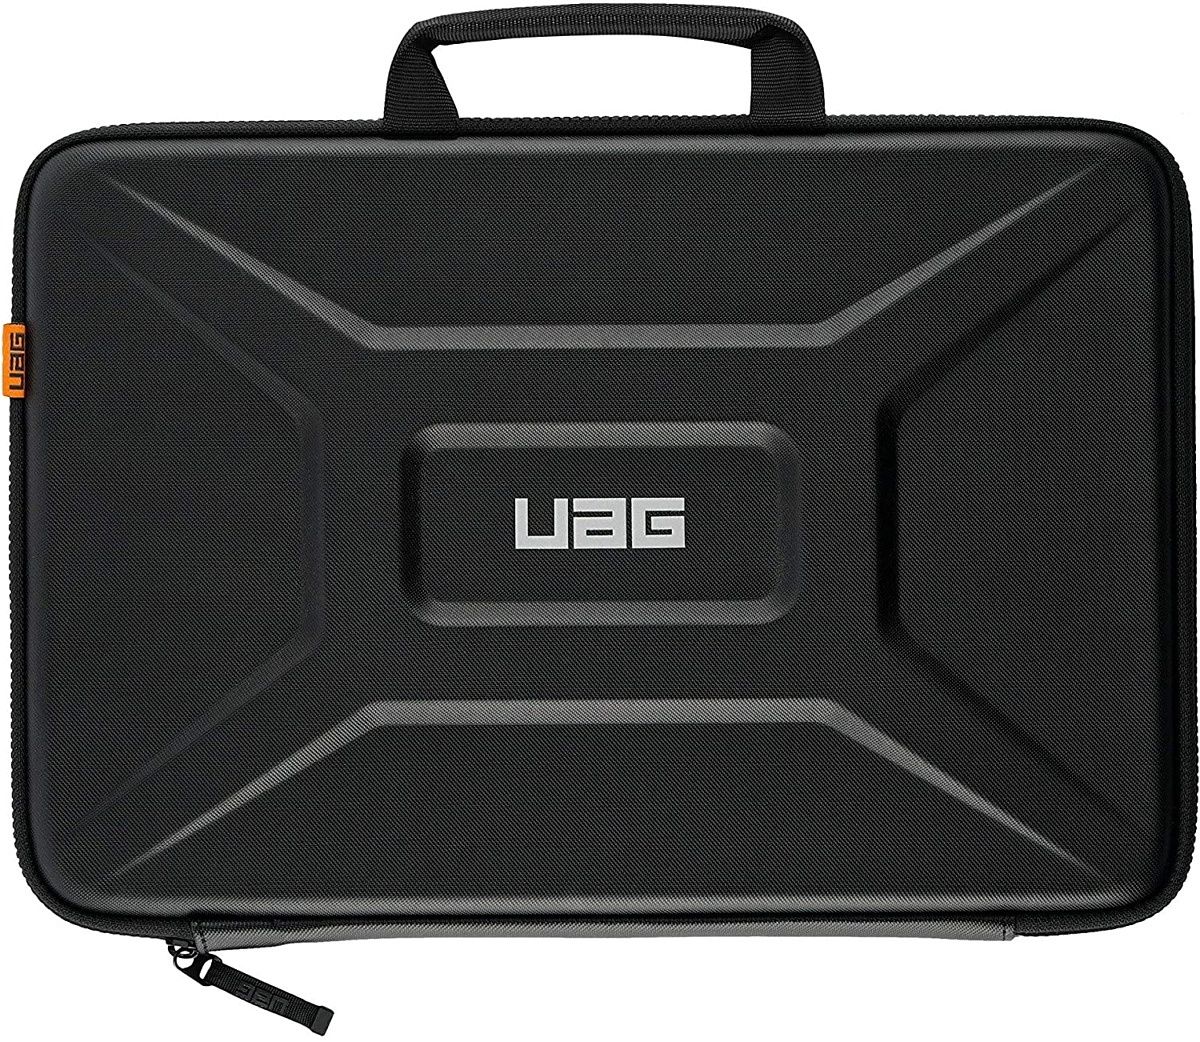 Need a bit tougher protection? The UAG laptop sleeve may just be for you, with a hard weather resistant shell and some extra space for accessories. You can get it with or without the handle, too.